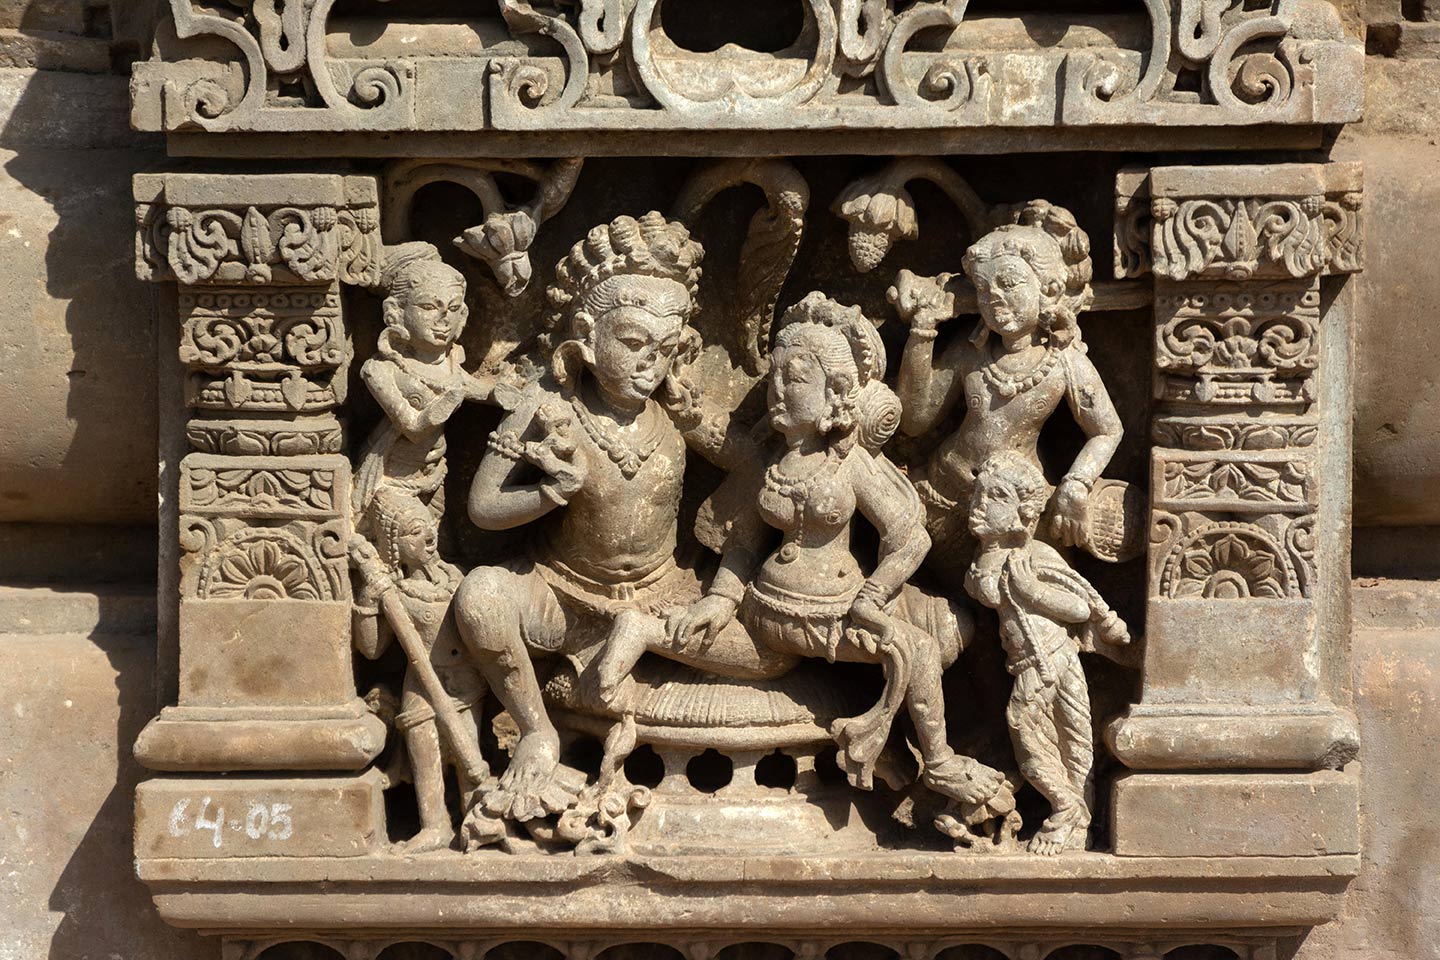 The central female figure is seated on his thigh, looking towards the man with her head turned. Both rest their right feet on blooming lotus flowers. The man is holding a flower in his right hand while the woman gently rests her right hand on his left foot. Trees in the background suggest they are in a grove. The couple is surrounded by four male and female attendants.